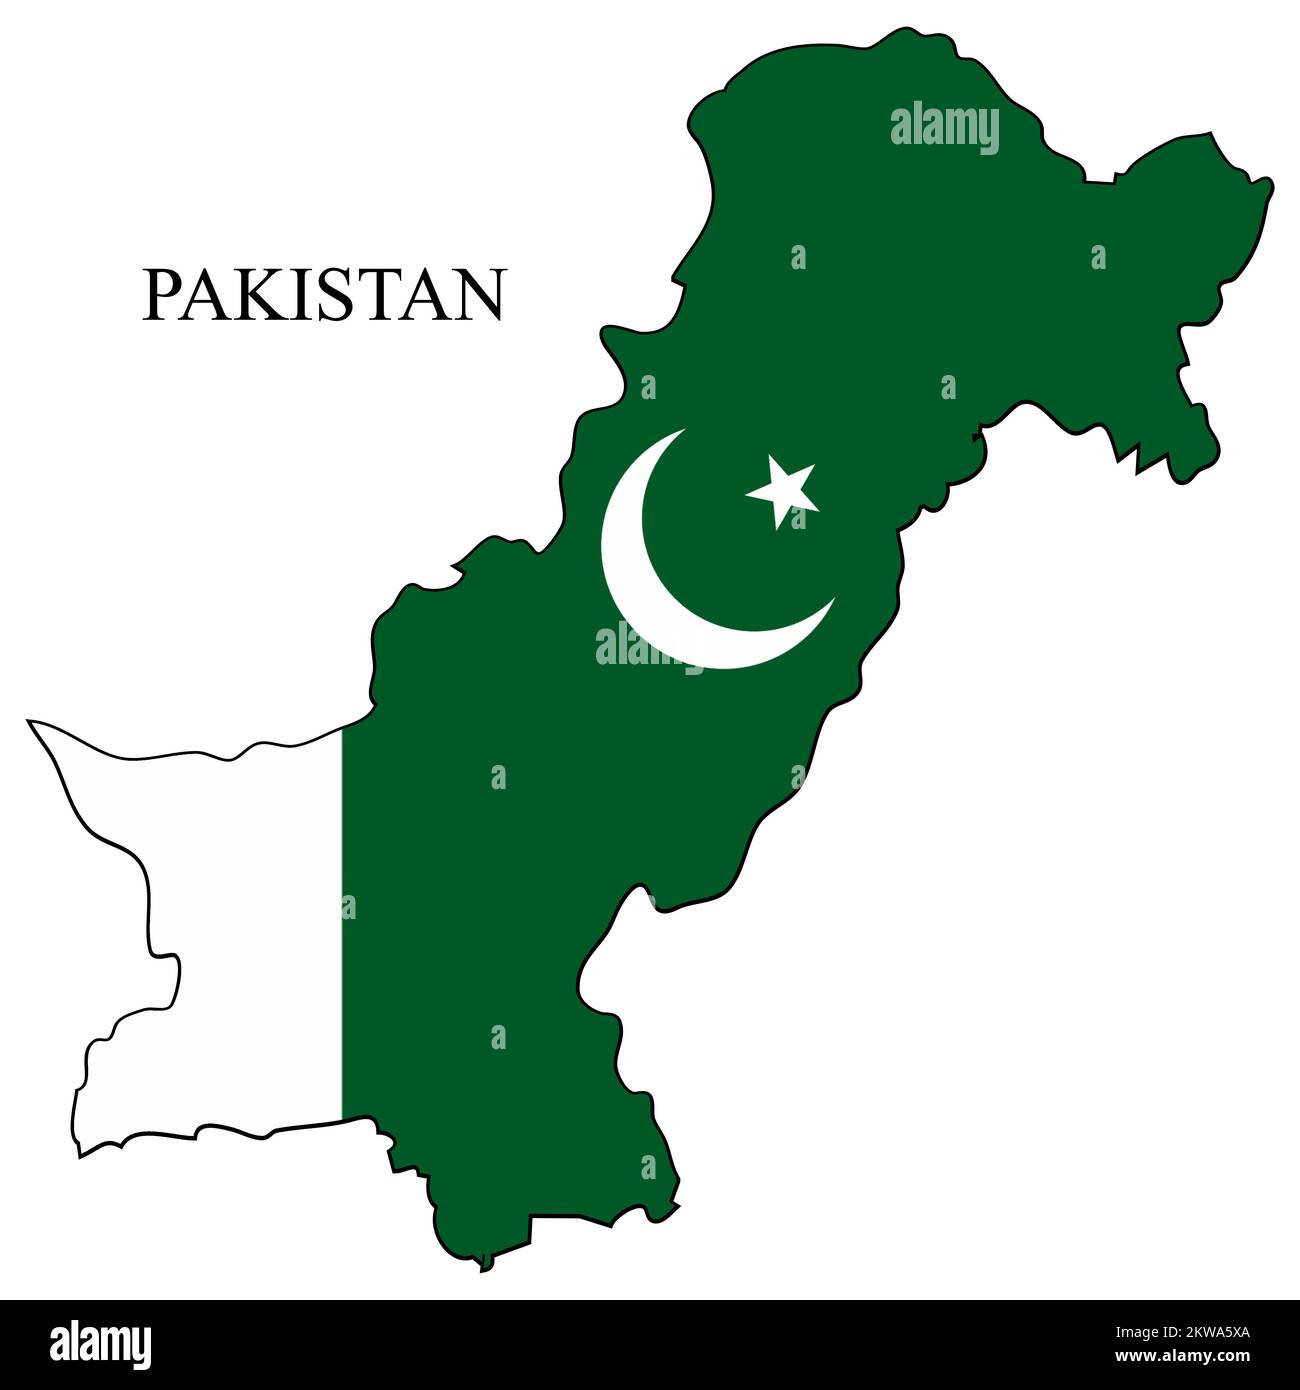 Pakistan map vector illustration. Global economy. Famous country. South Asia. Stock Vector